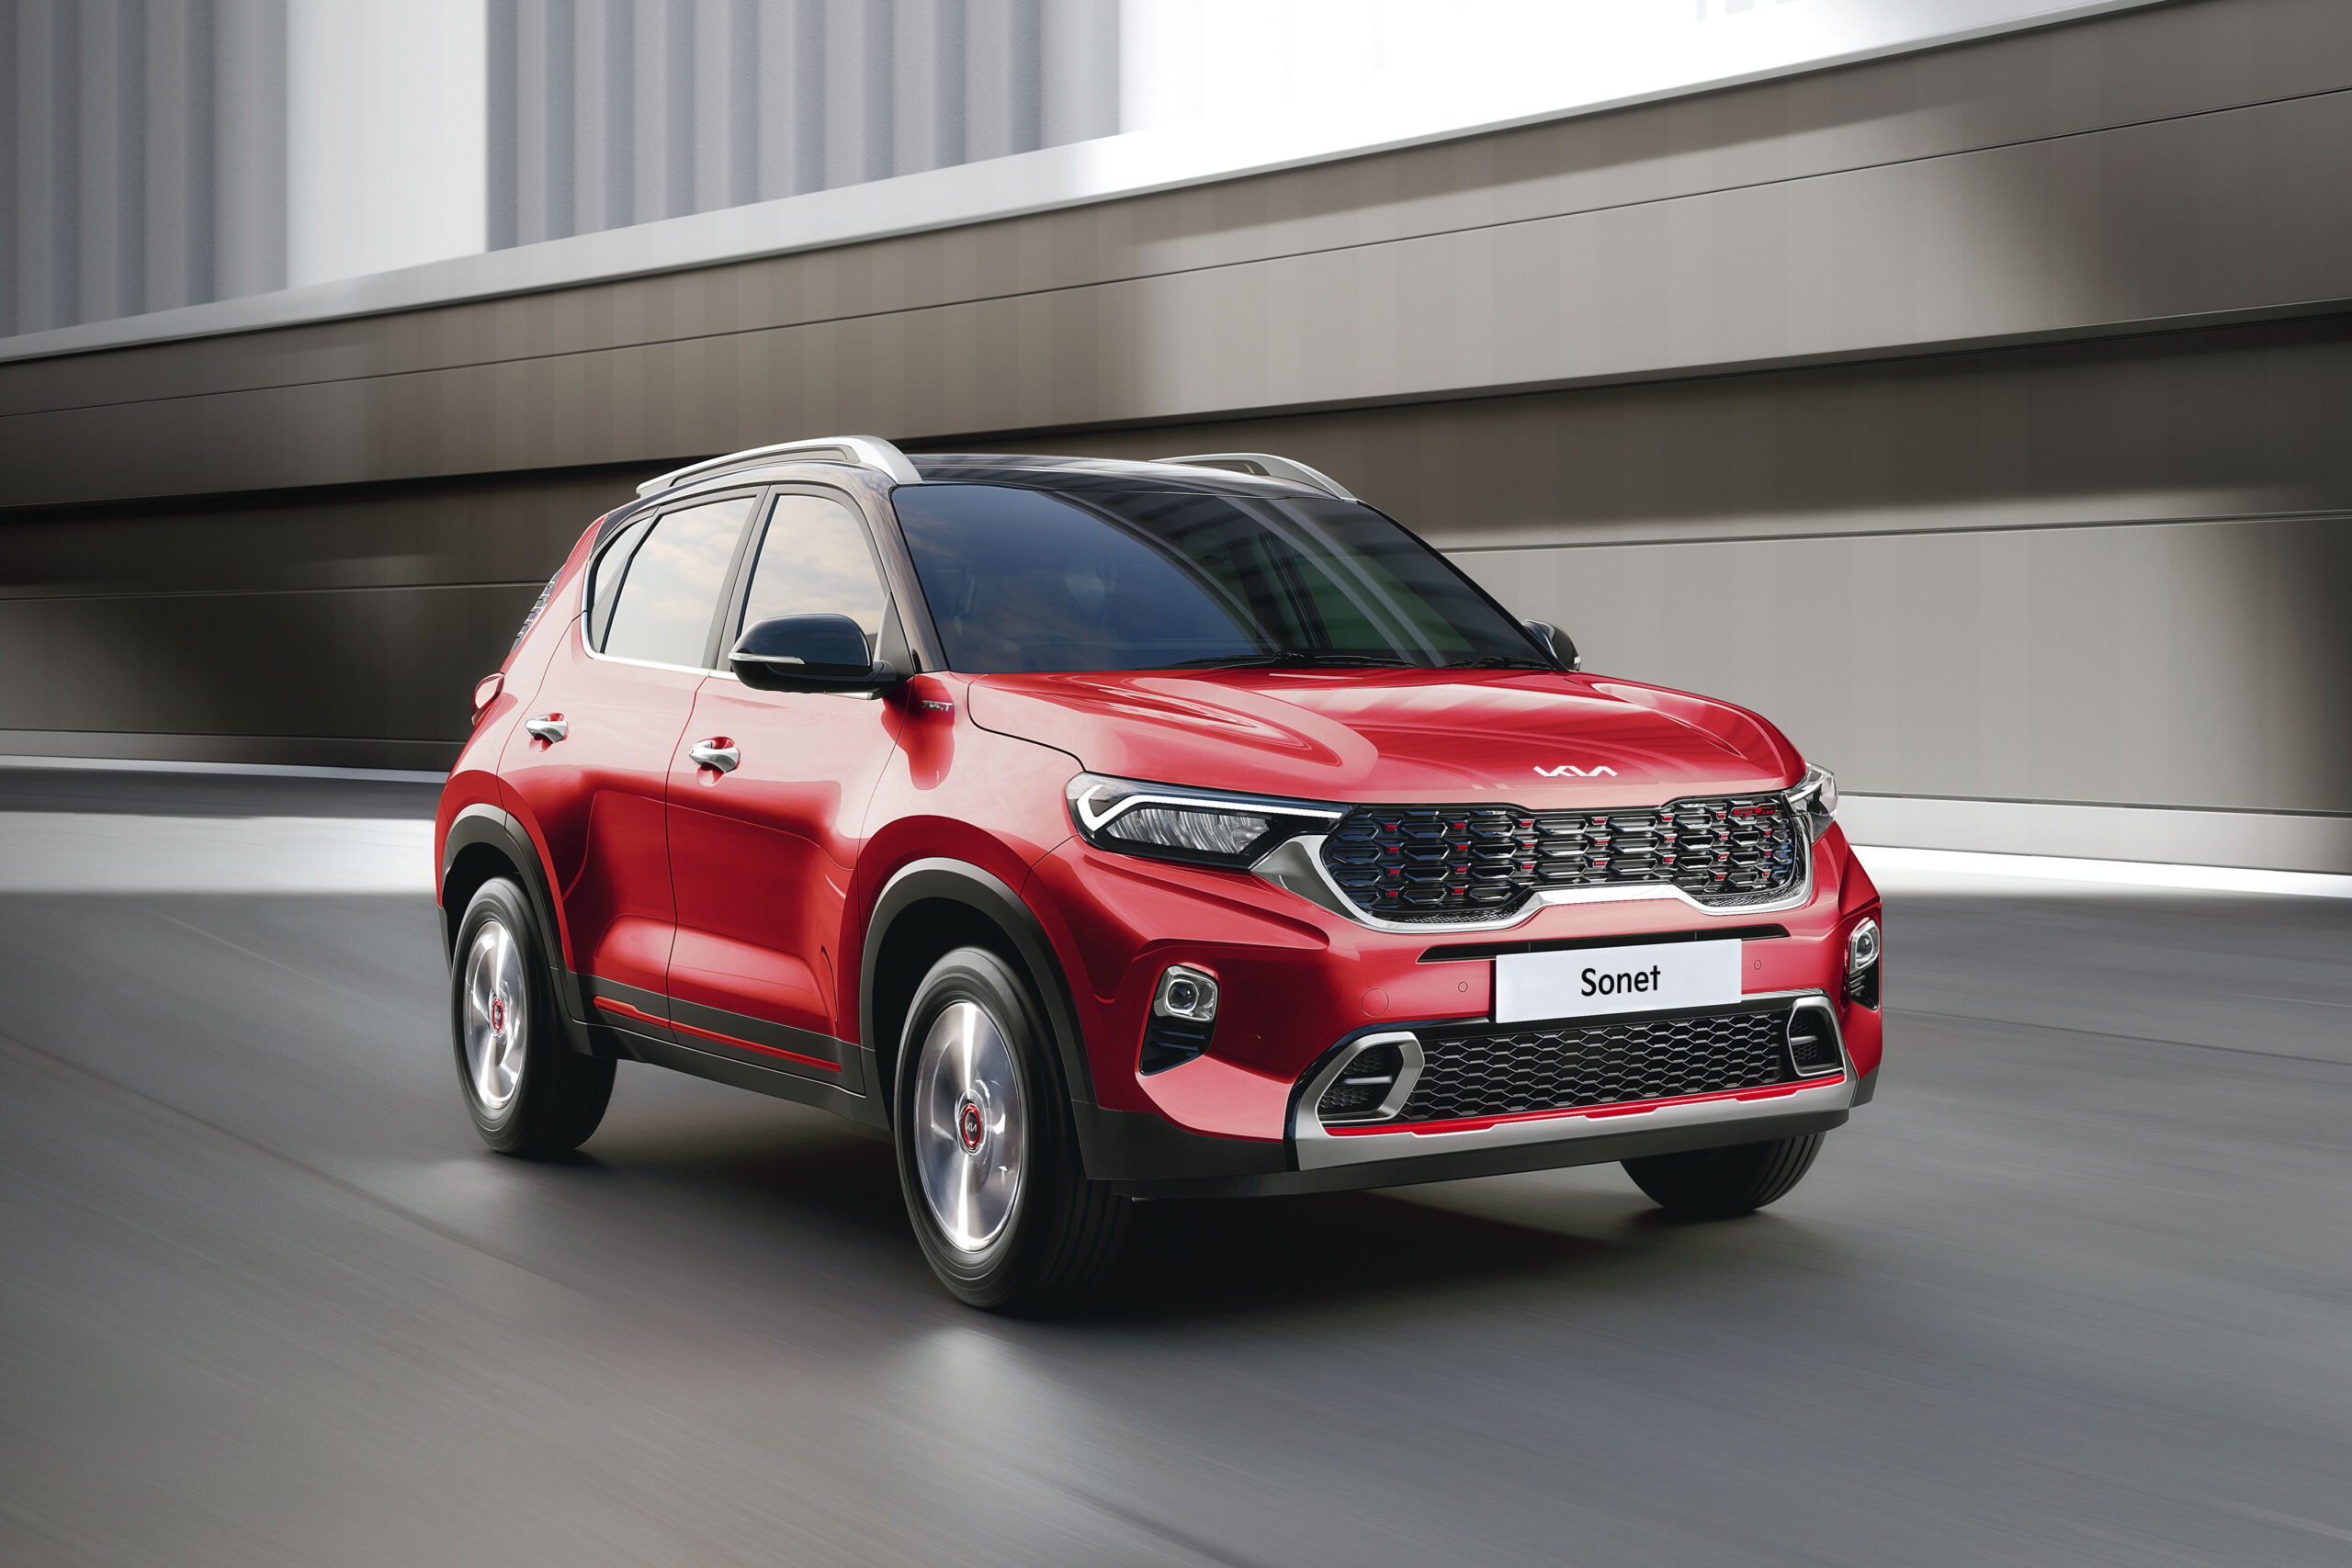 Kia Sonet secures top spot for most affordable maintenance in compact SUV segment-Reveals Frost & Sullivan Study